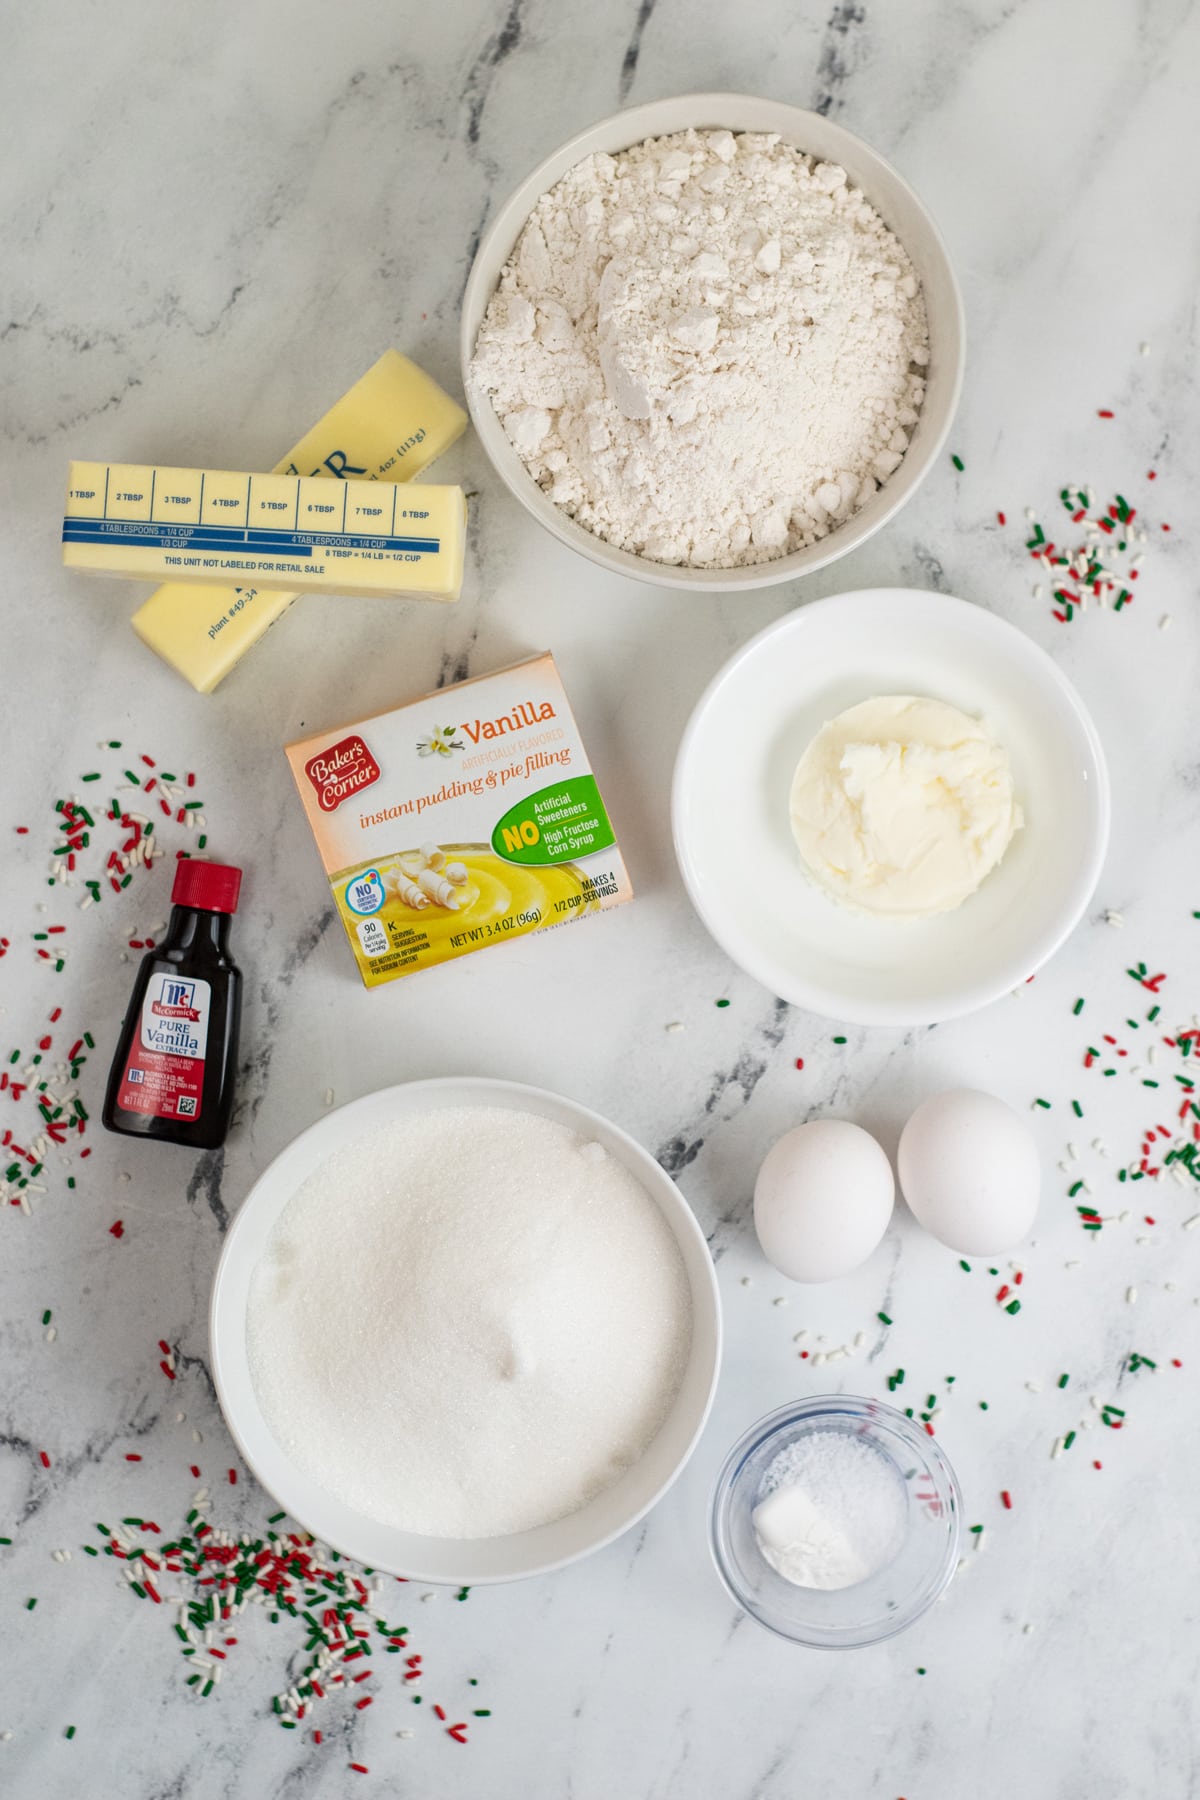 Christmas Sprinkle Cookie Recipe ingredients include ¾ Cups Butter – softened , ¼ Cup Shortening, 1 ½ Cups Sugar 2 Eggs, 1 ½ tsp Vanilla, 2 ½ Cups Flour, 1 Box Instant Vanilla Pudding , 1 tsp Baking Powder, ½ tsp Salt and 1 Cup Green, and Red & White Jimmie Sprinkles